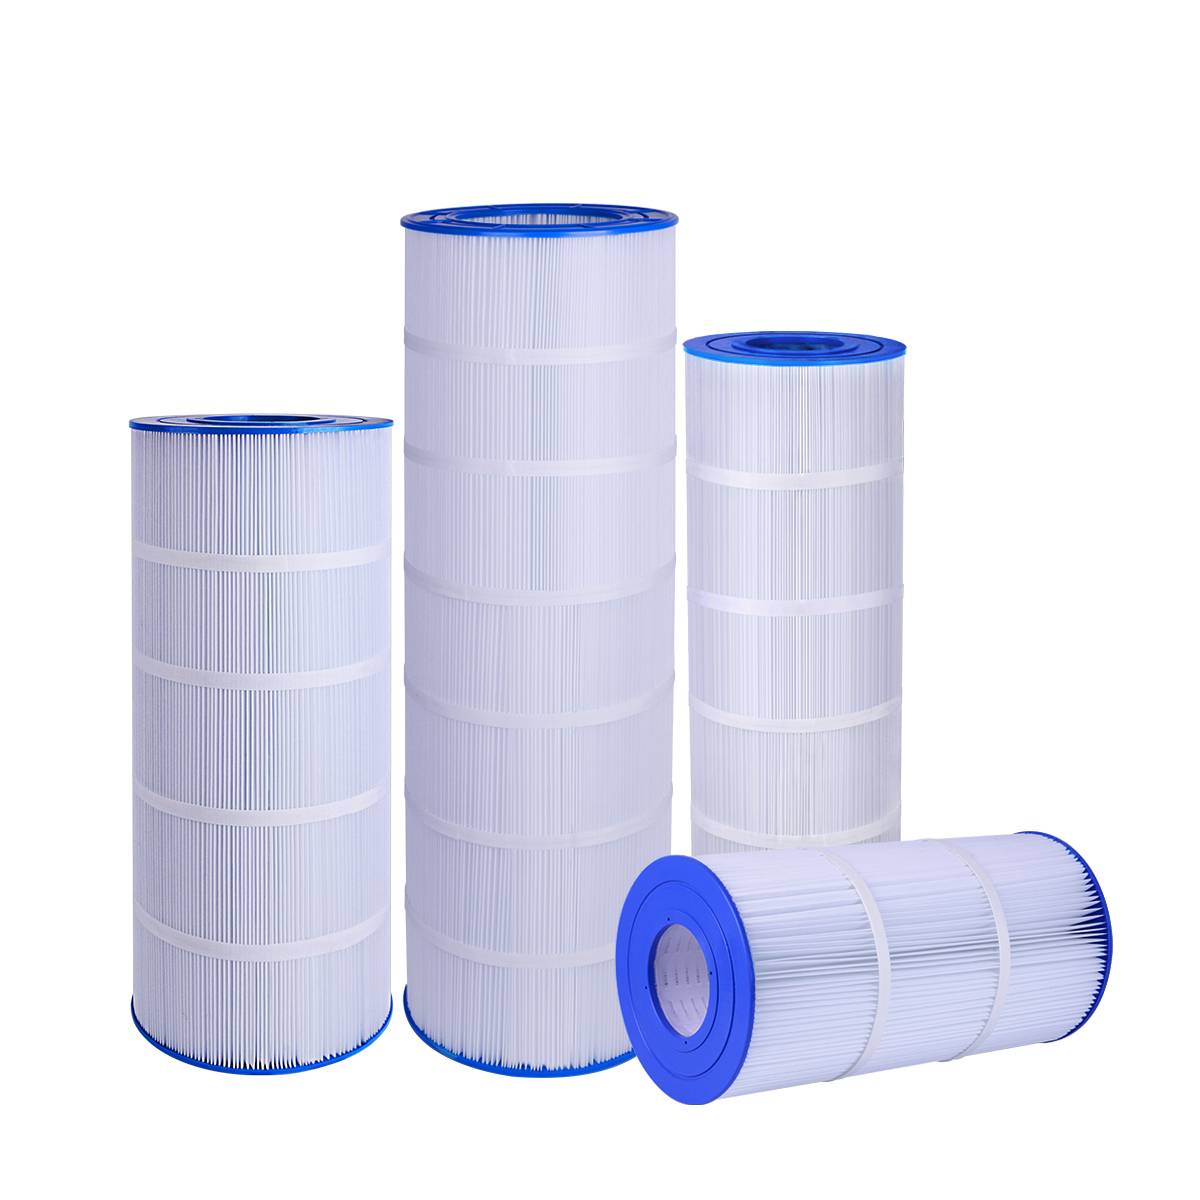 How to Use Pleatco Pool Filter Economically？